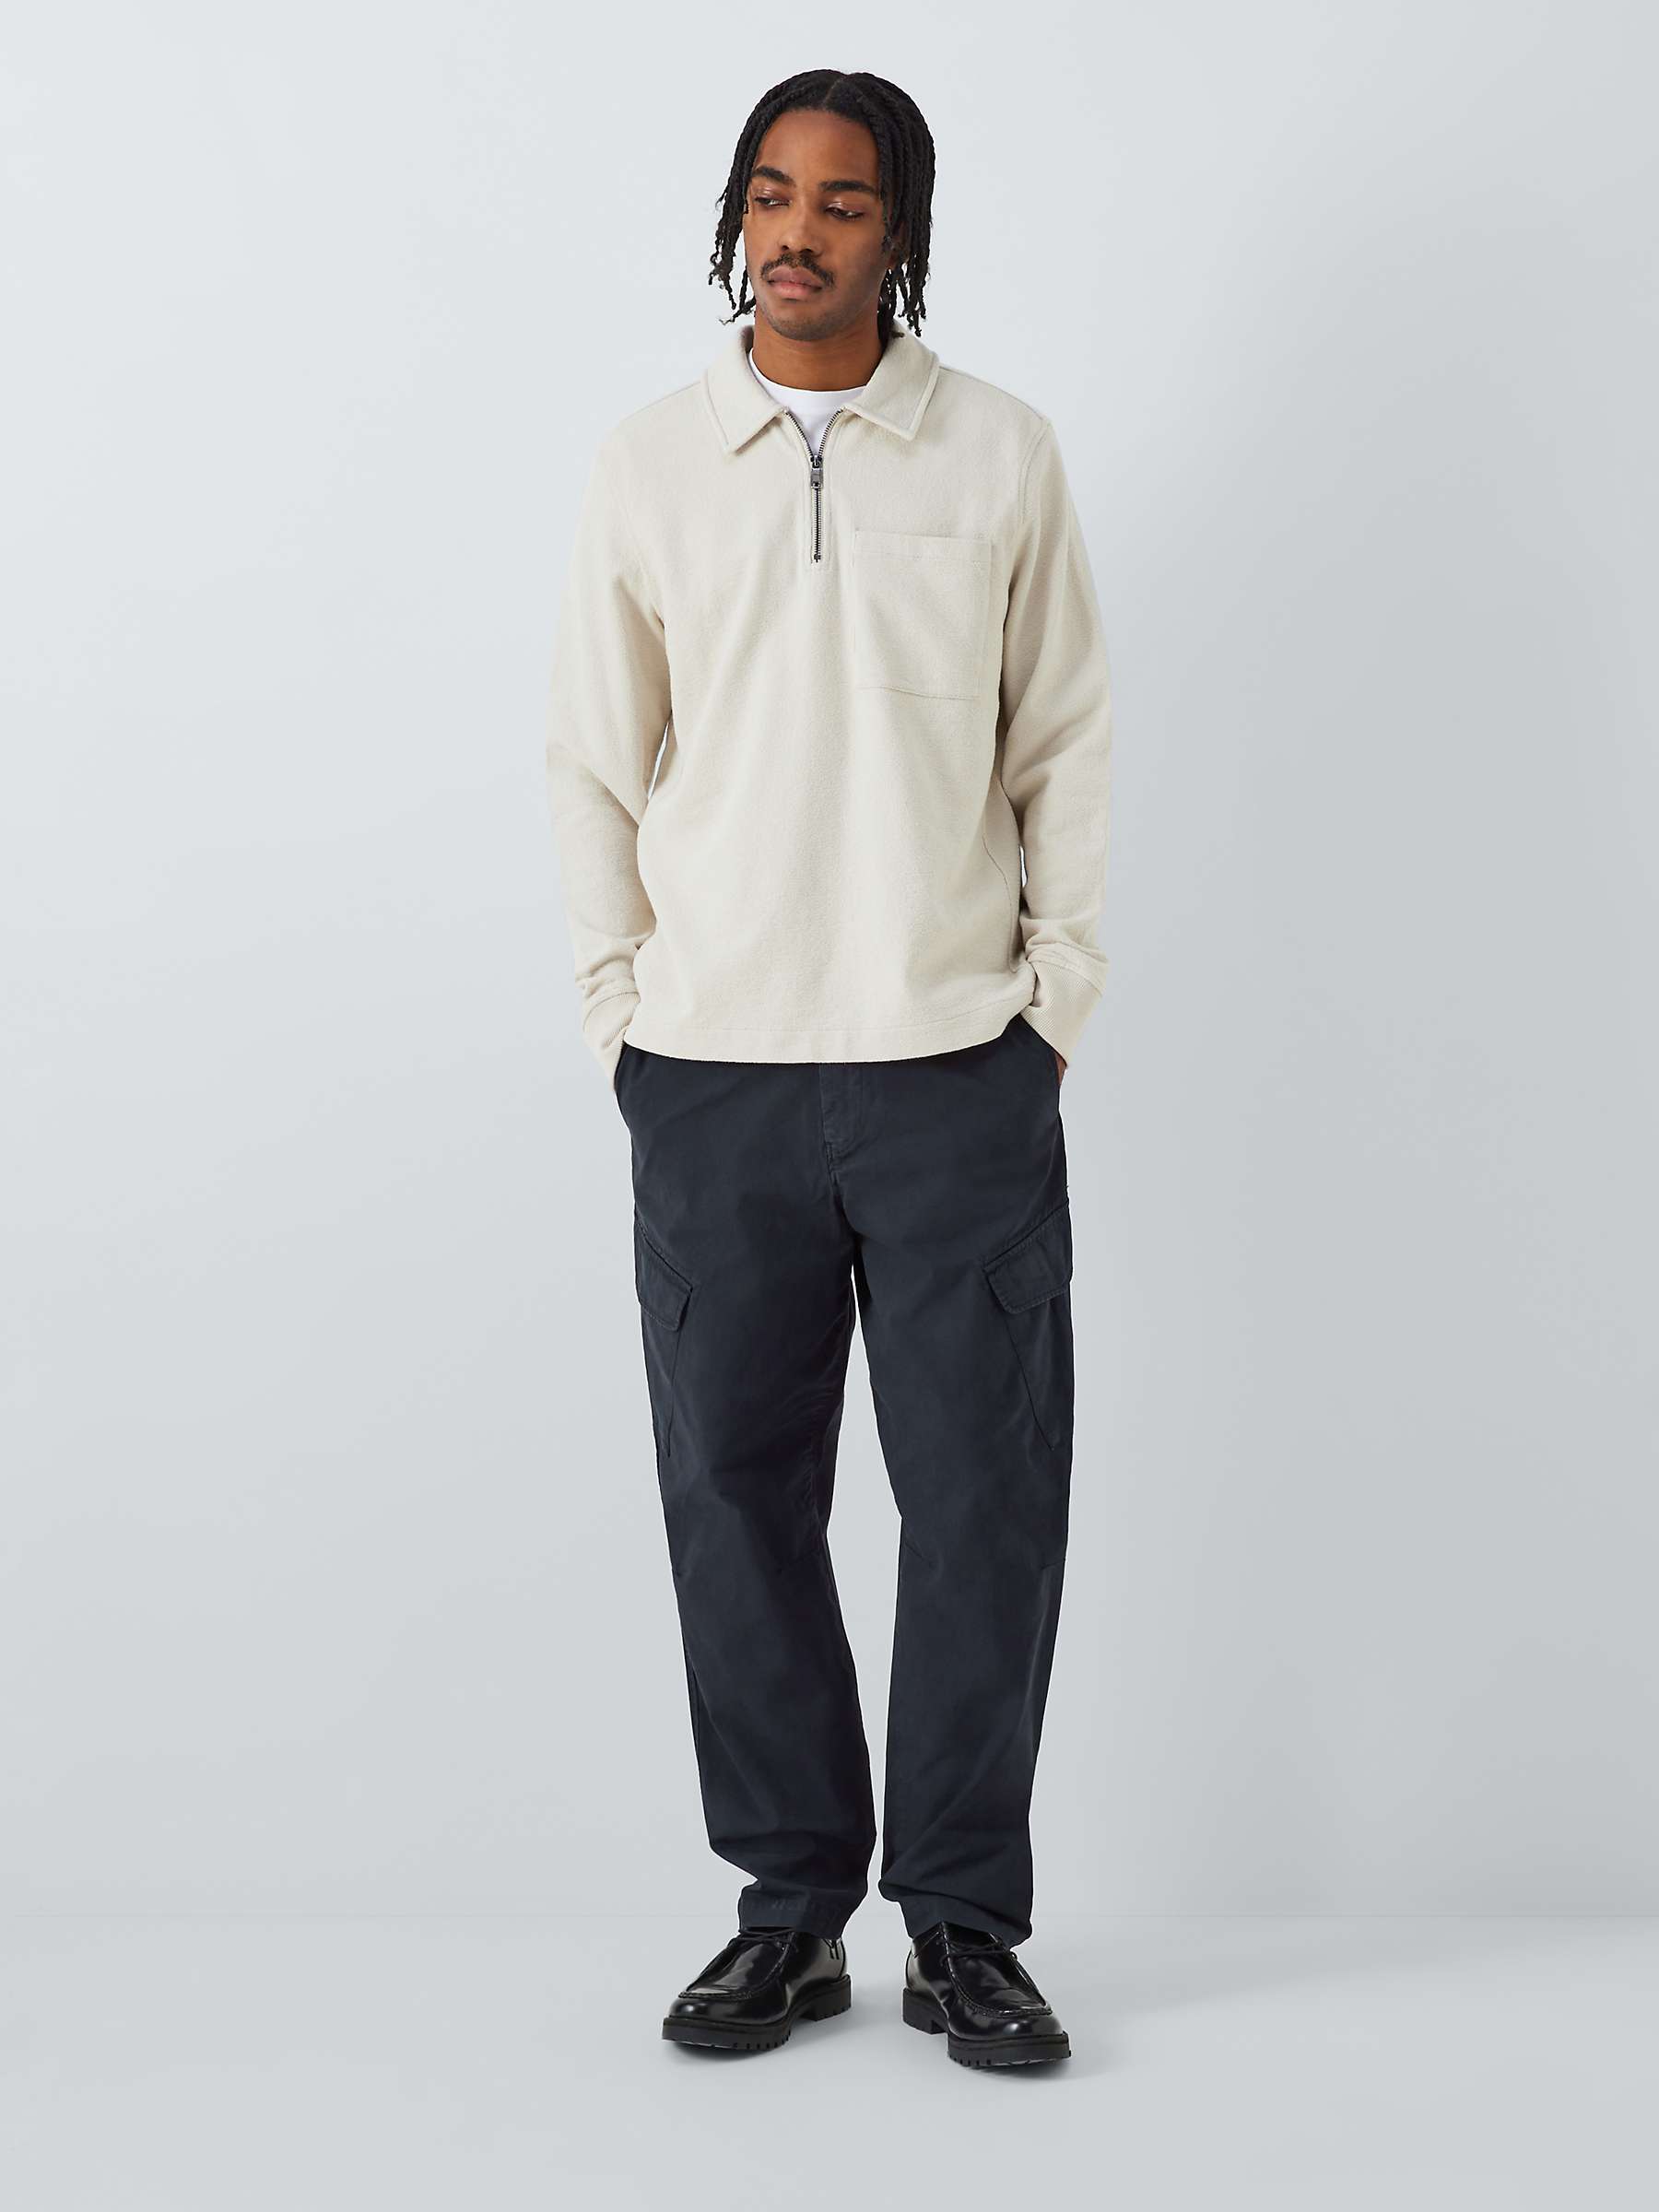 Buy Paul Smith Organic Cotton Chinos, Navy Online at johnlewis.com